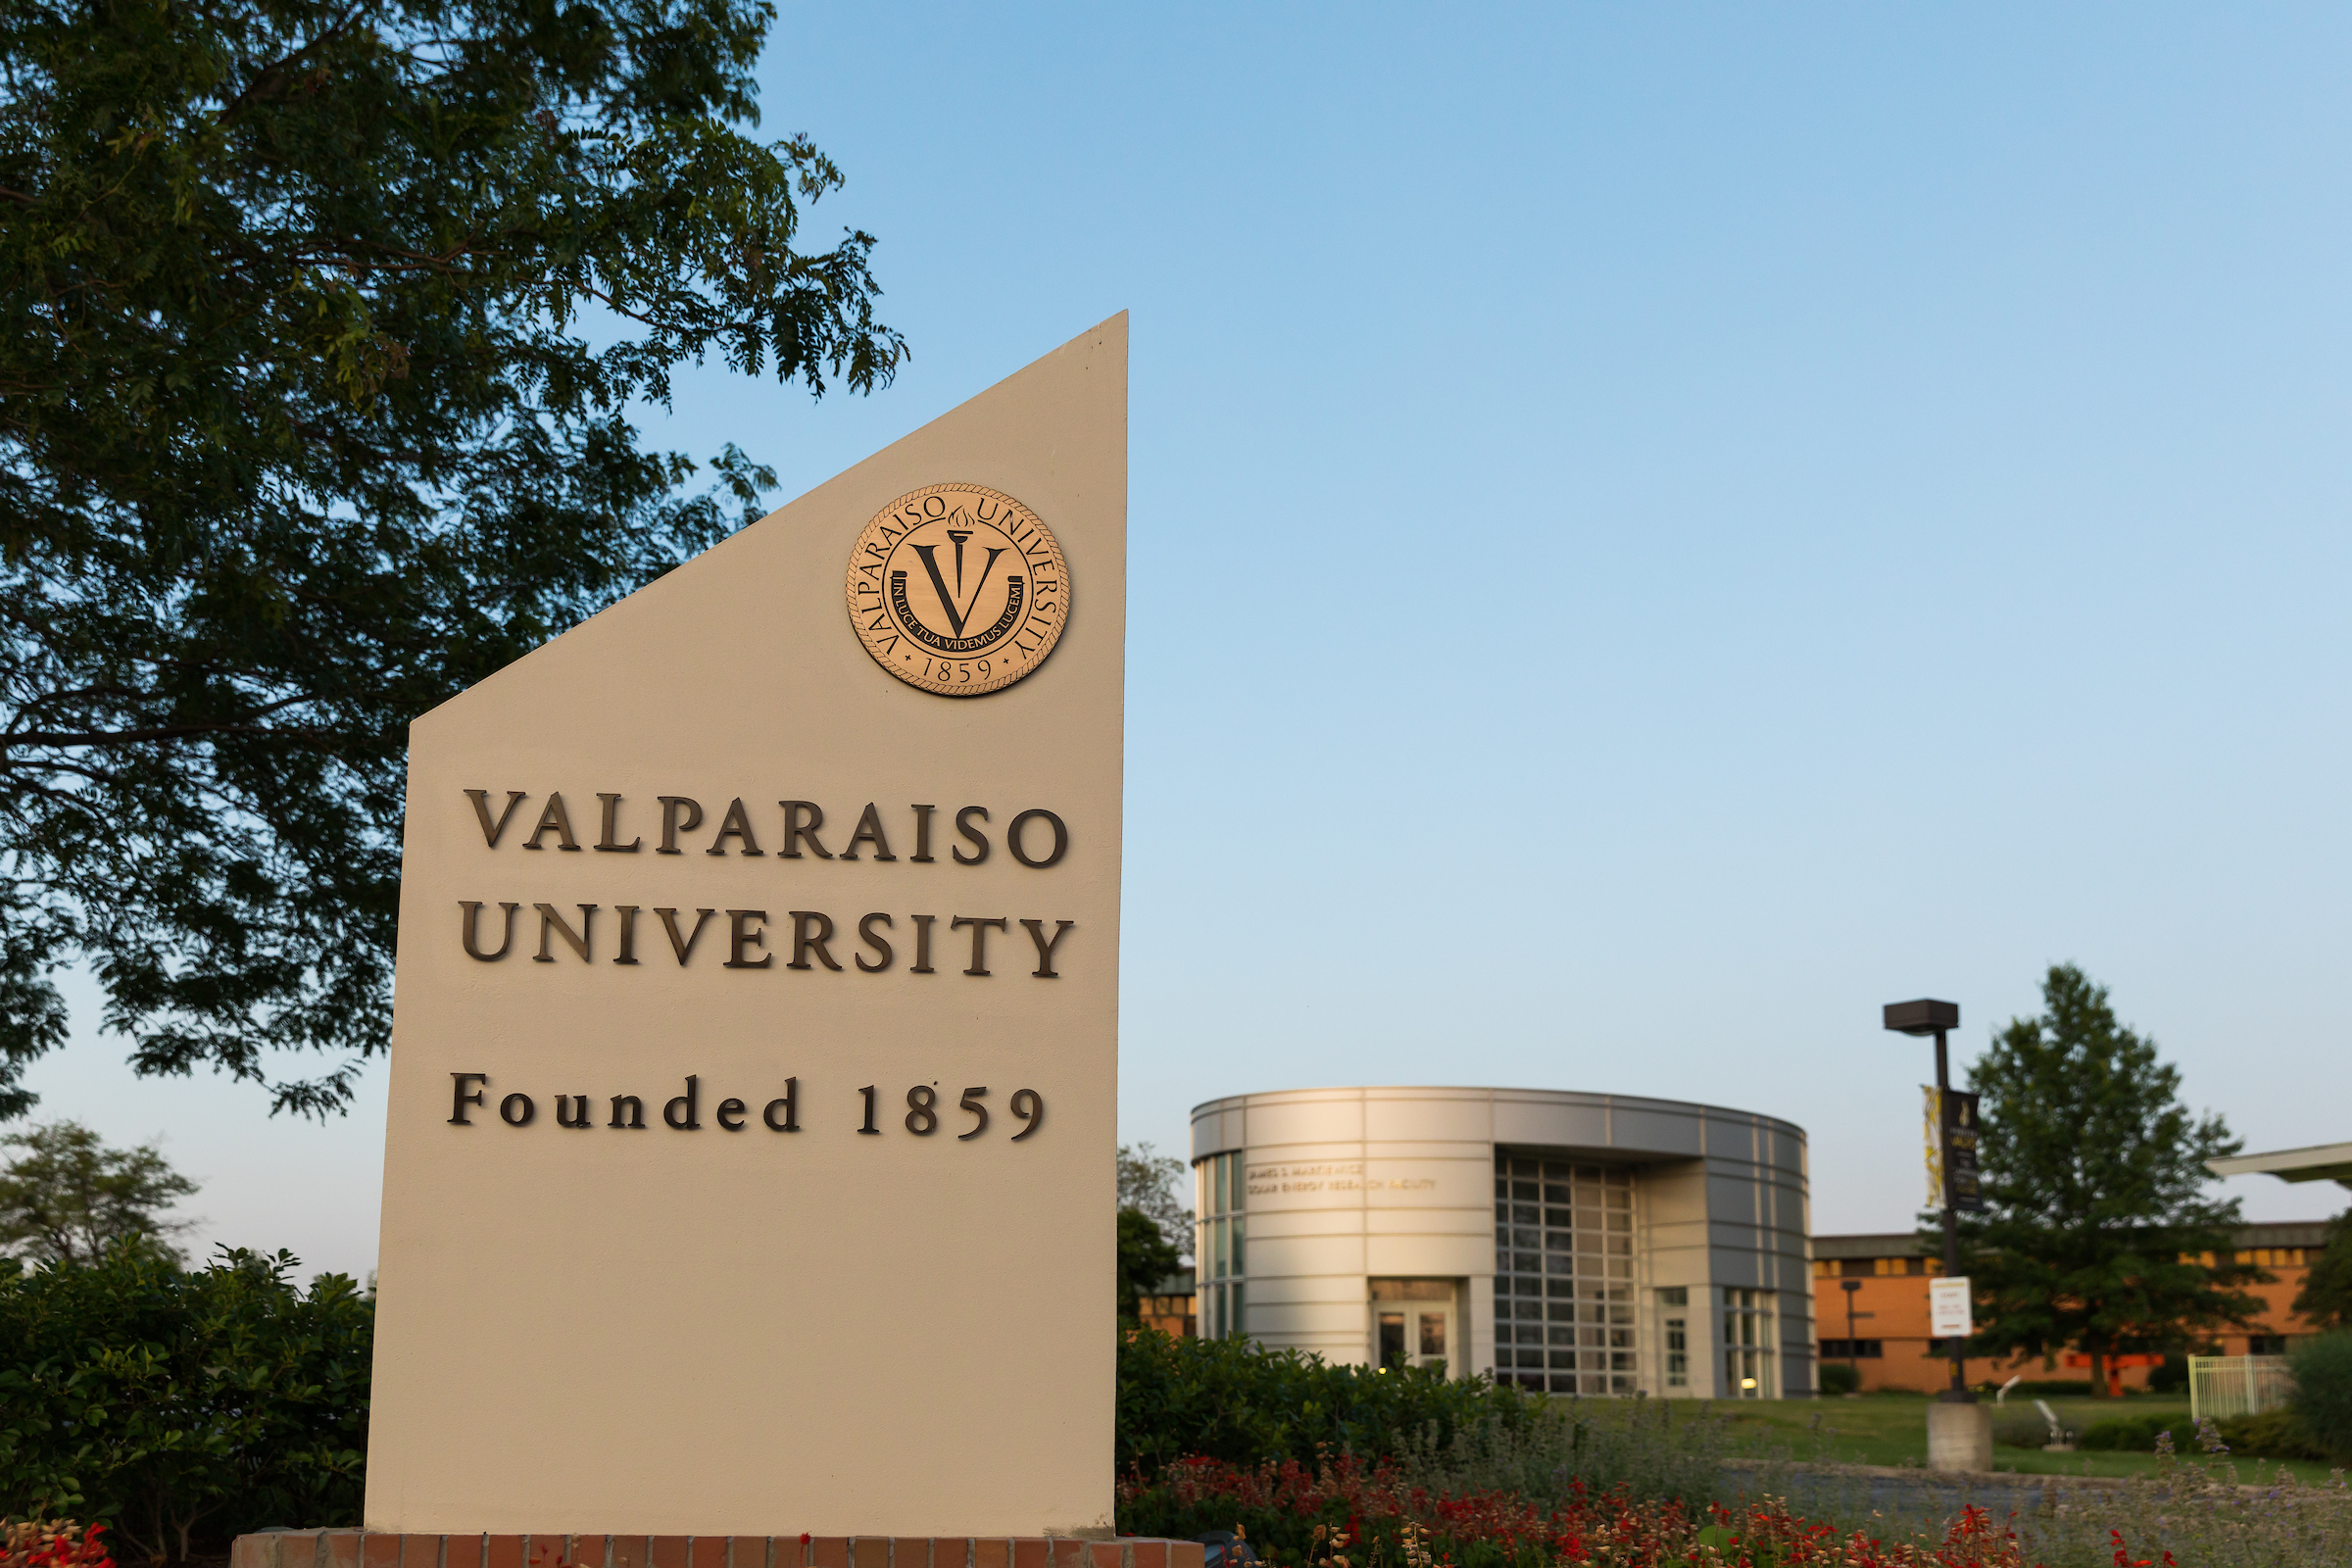 Campus photo with VALPARAISO UNIVERSITY sign in foreground and solar energy research facility in background